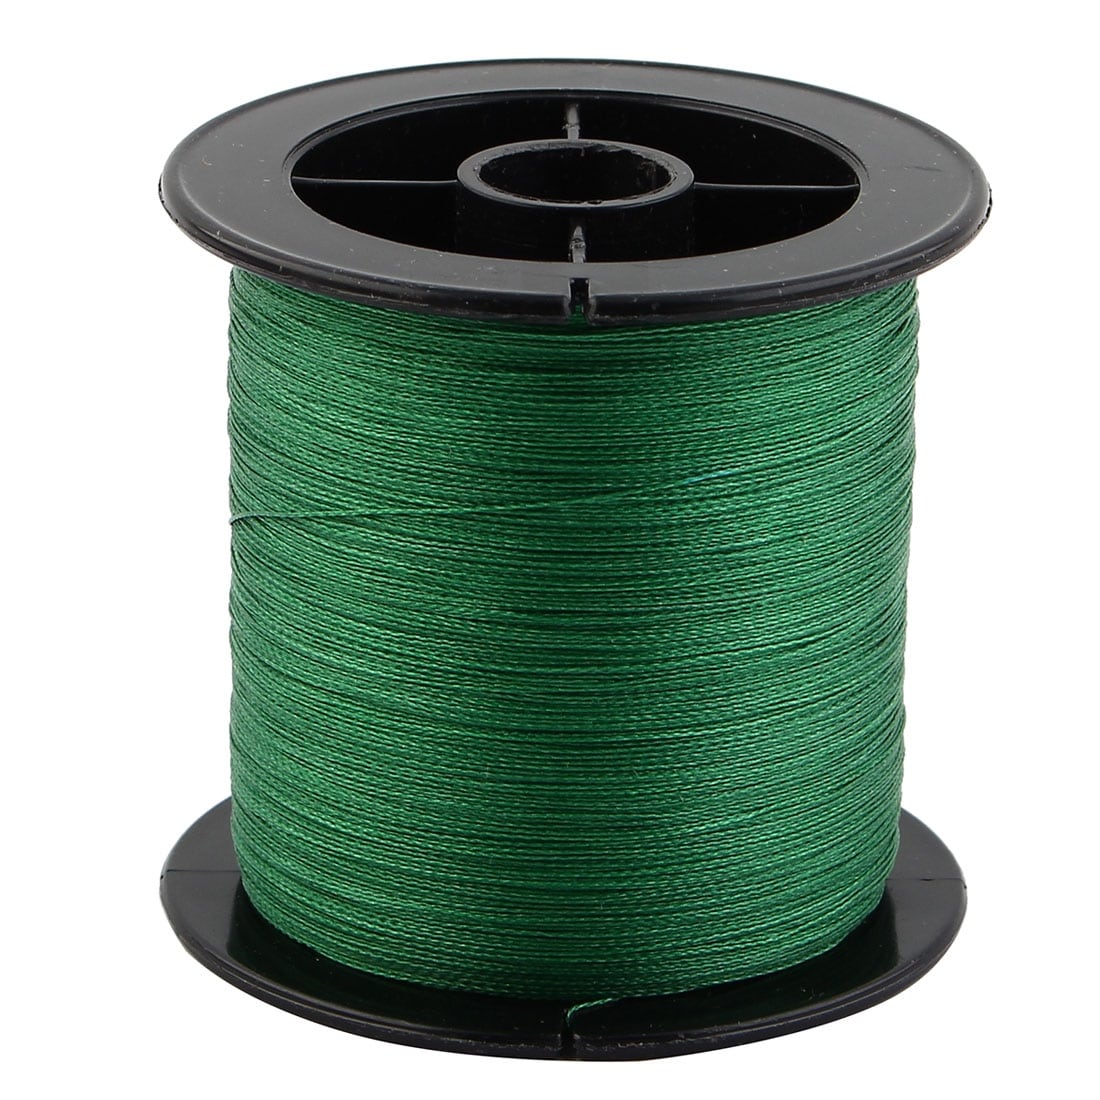 https://ak1.ostkcdn.com/images/products/is/images/direct/f53db12bfe0911d46ace76c297a0f1b73cf2ef0a/Fisherman-PE-Beading-Thread-Fishing-Line-Green-300m-Length.jpg